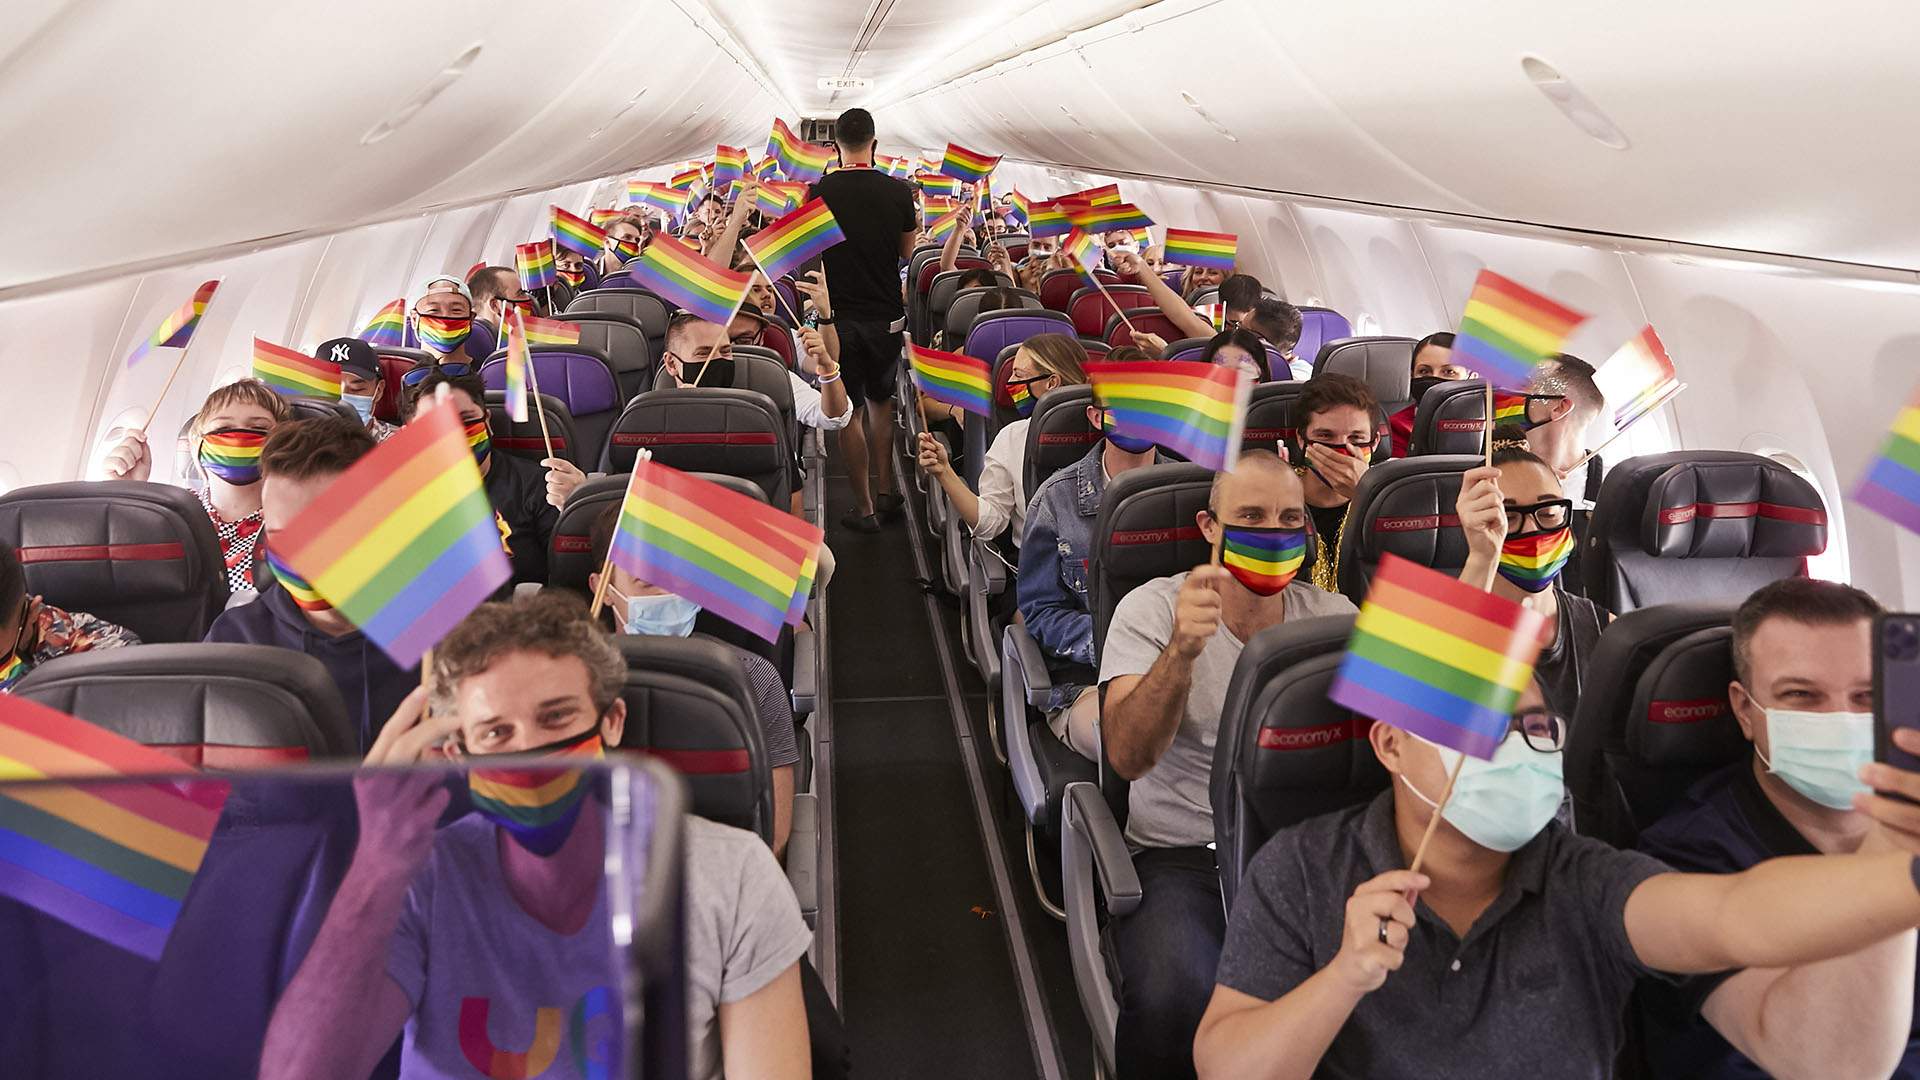 Virgin Is Bringing Back Its Boozy Pride Flights with Drag, DJs and Bottomless Drinks for Mardi Gras